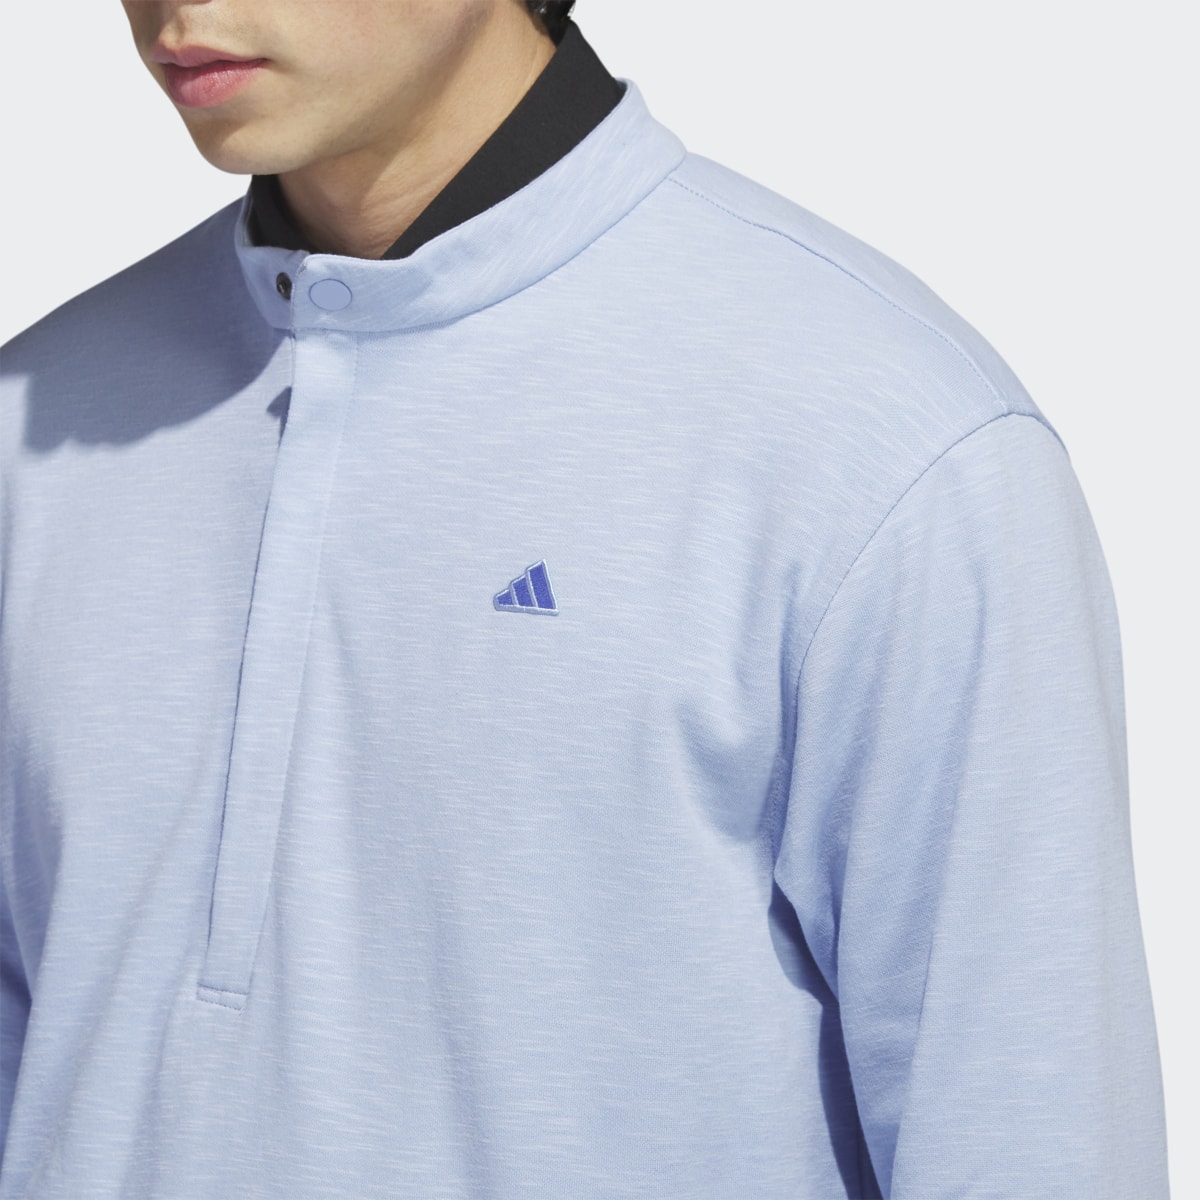 Adidas Go-To 1/2-Zip Pullover. 6